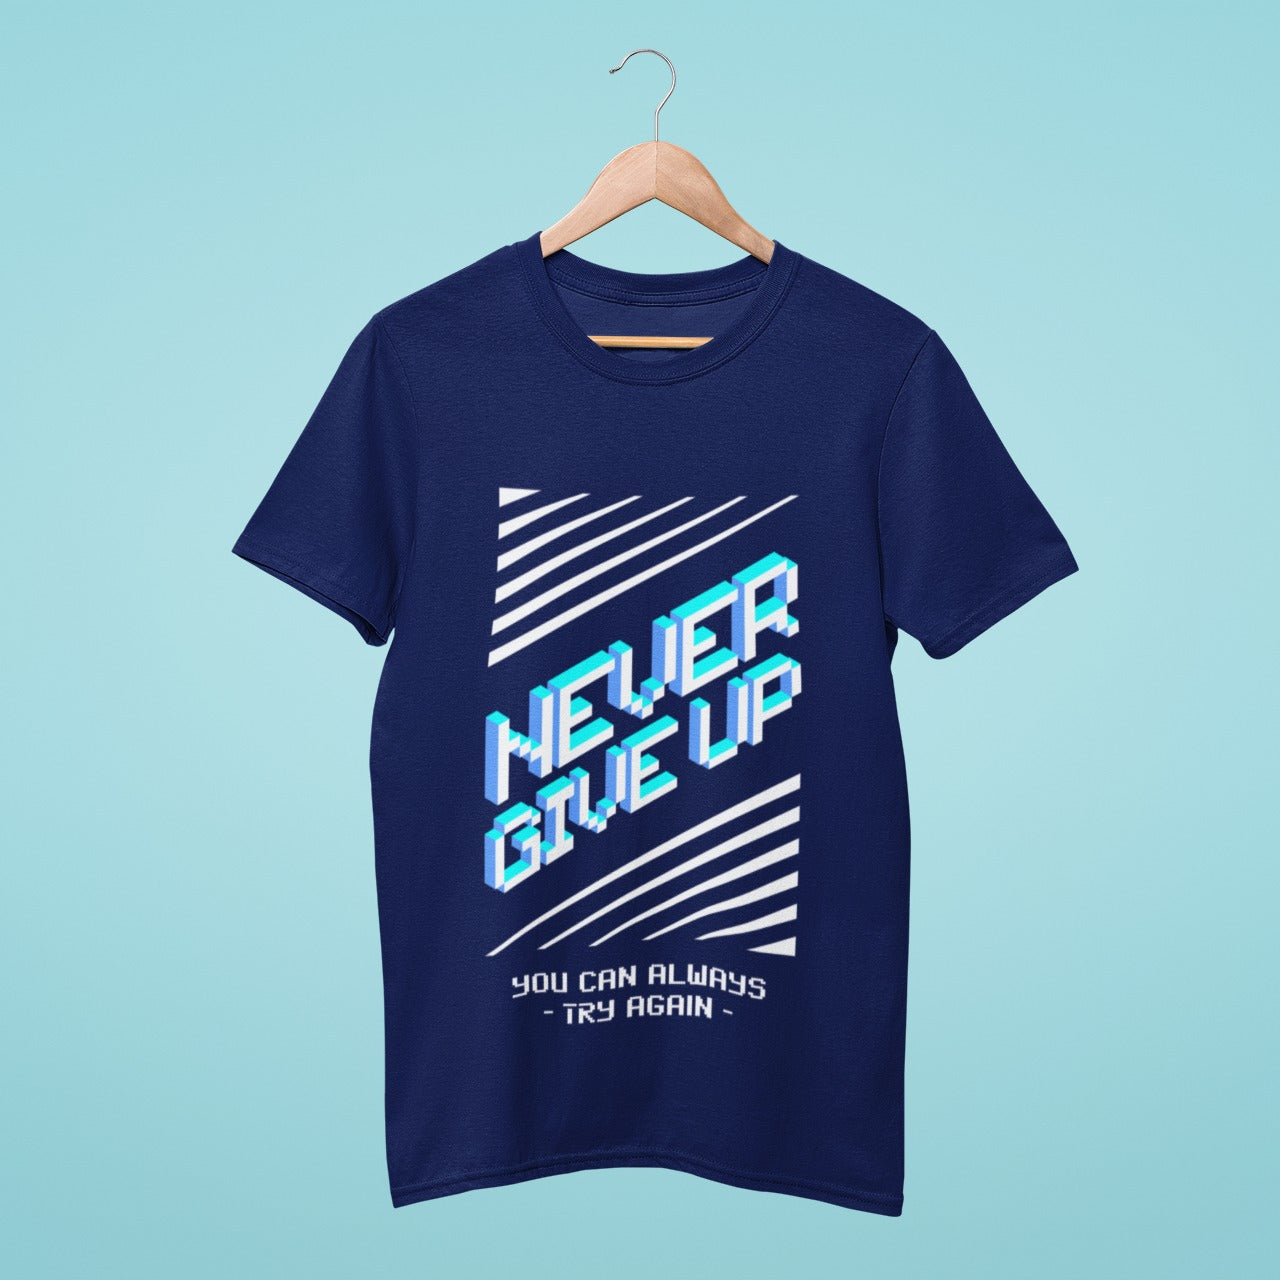 Level up your wardrobe with this navy blue t-shirt featuring a powerful message for gamers: 'Never give up' in bold letters at the center, and 'You can always try again' in small below. Show off your determination and resilience in style!